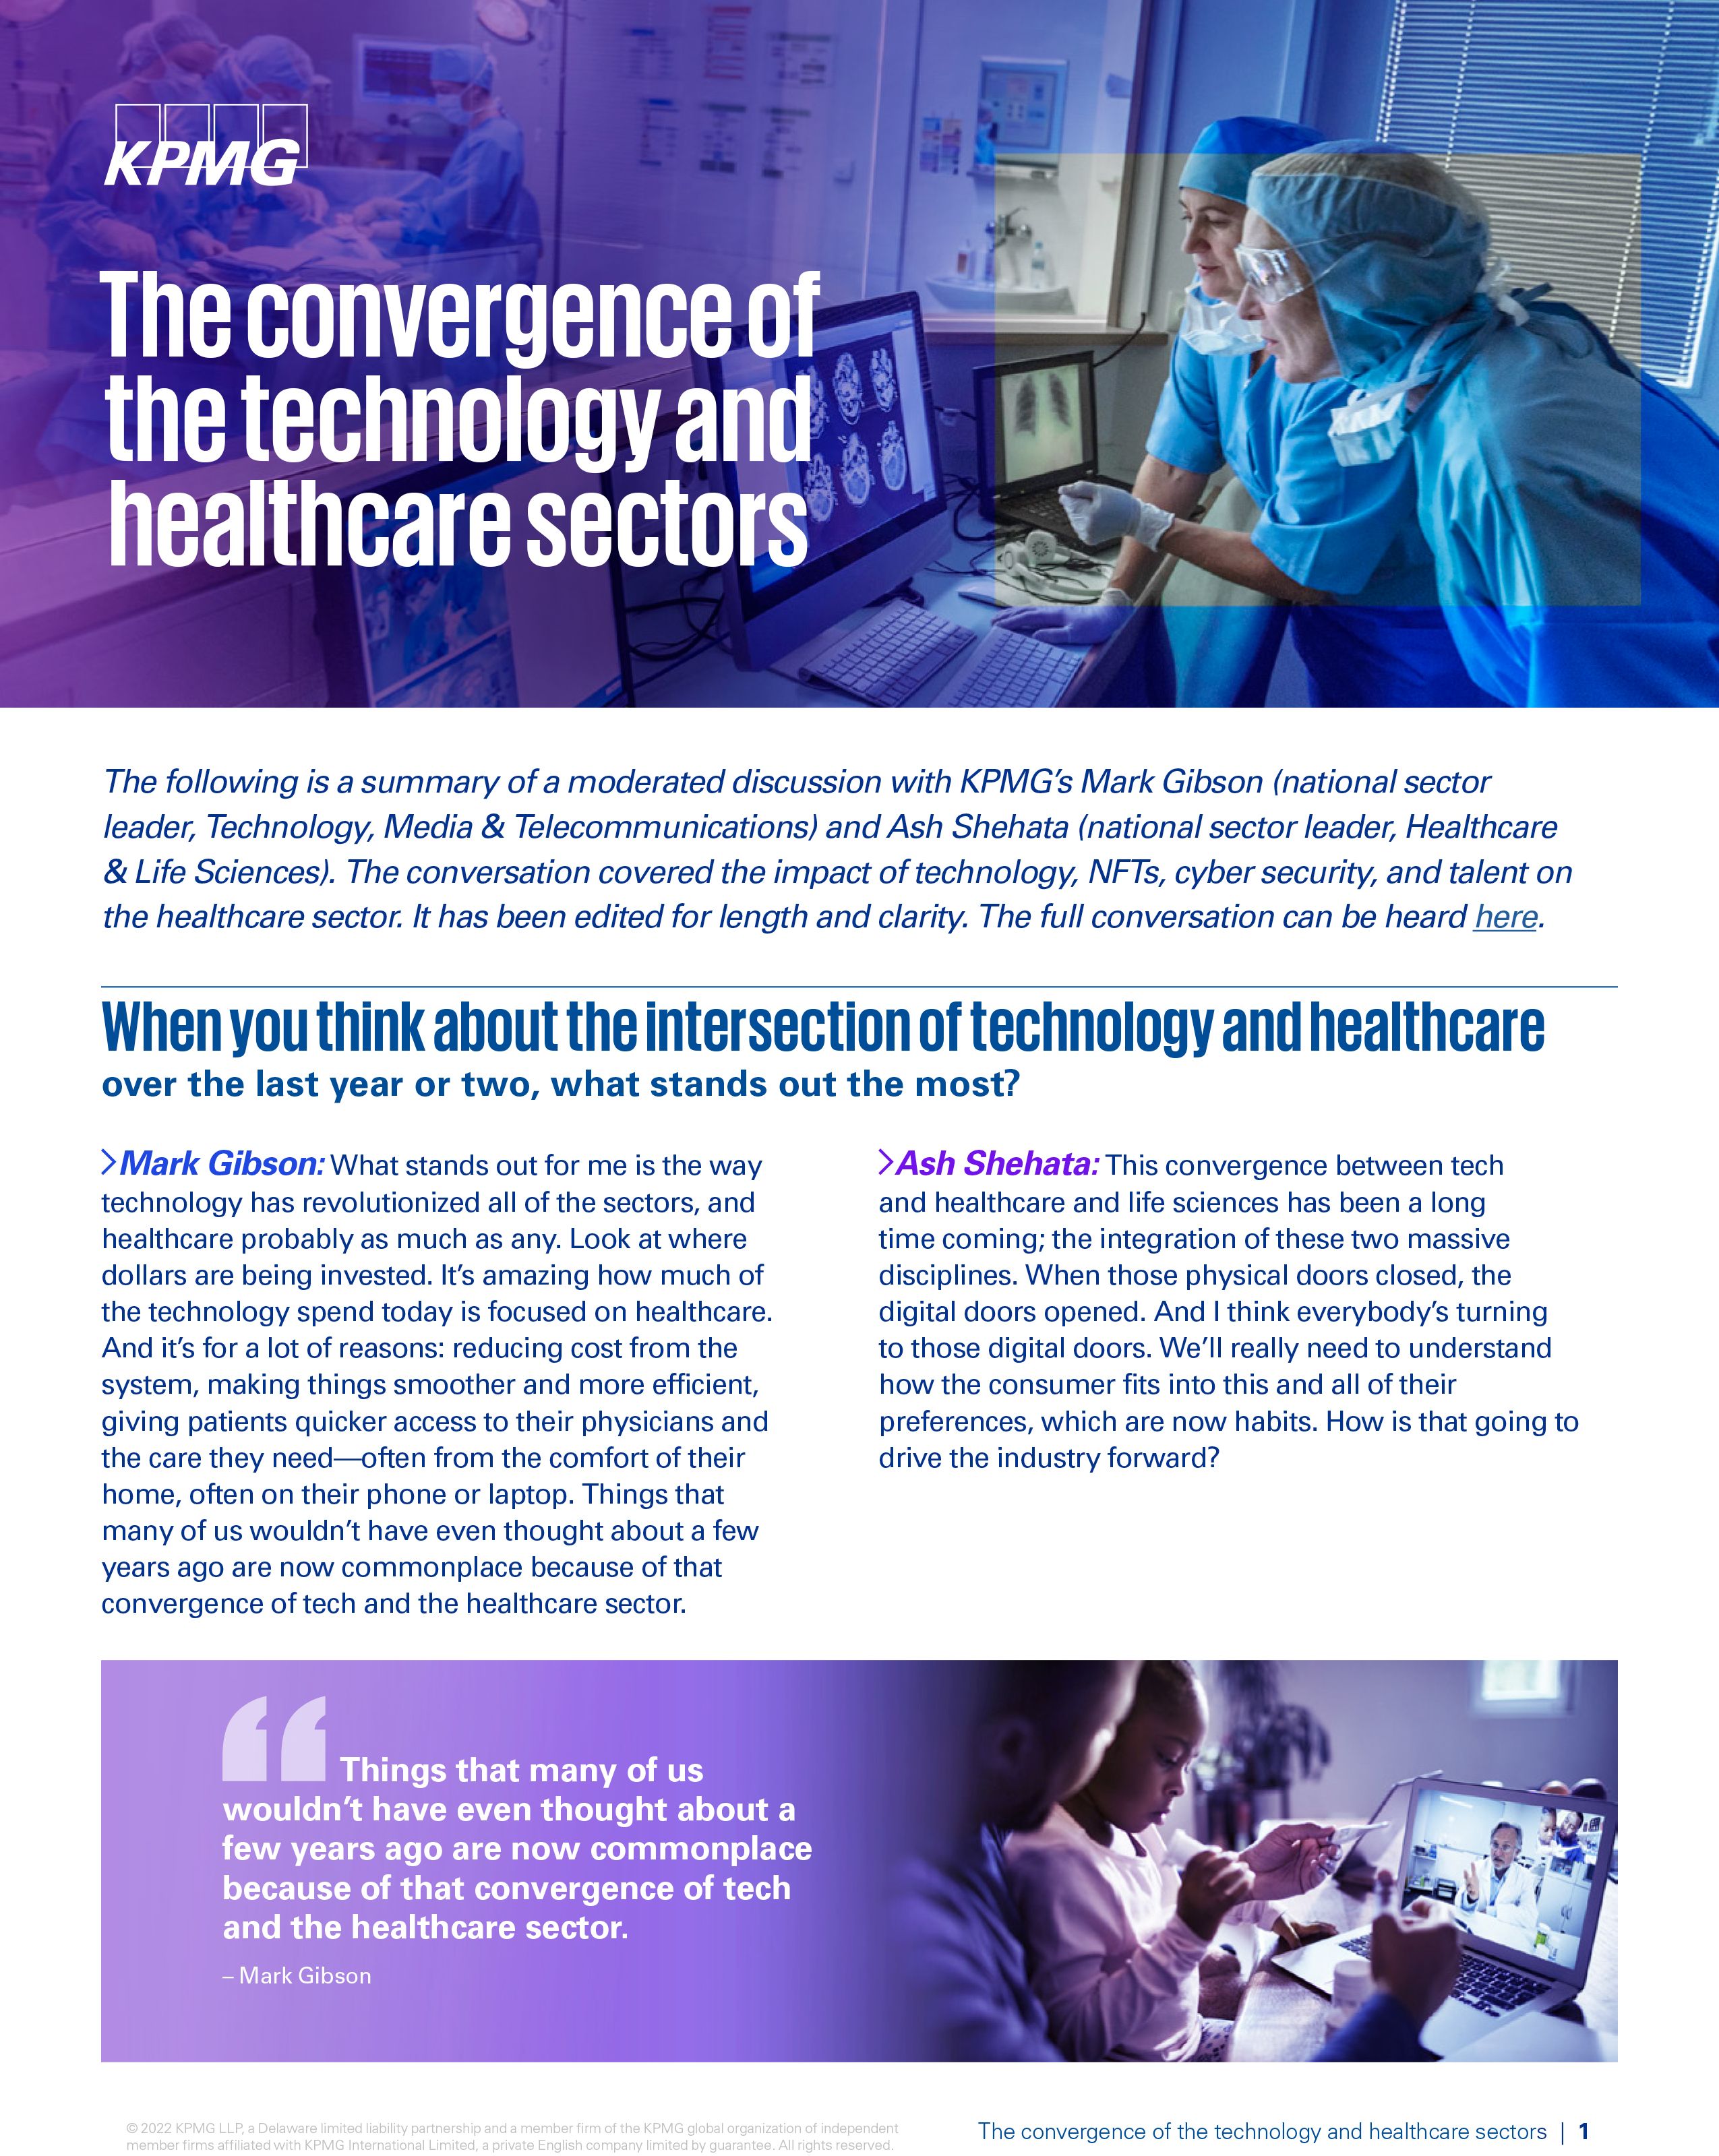 The convergence of the technology and healthcare sectors